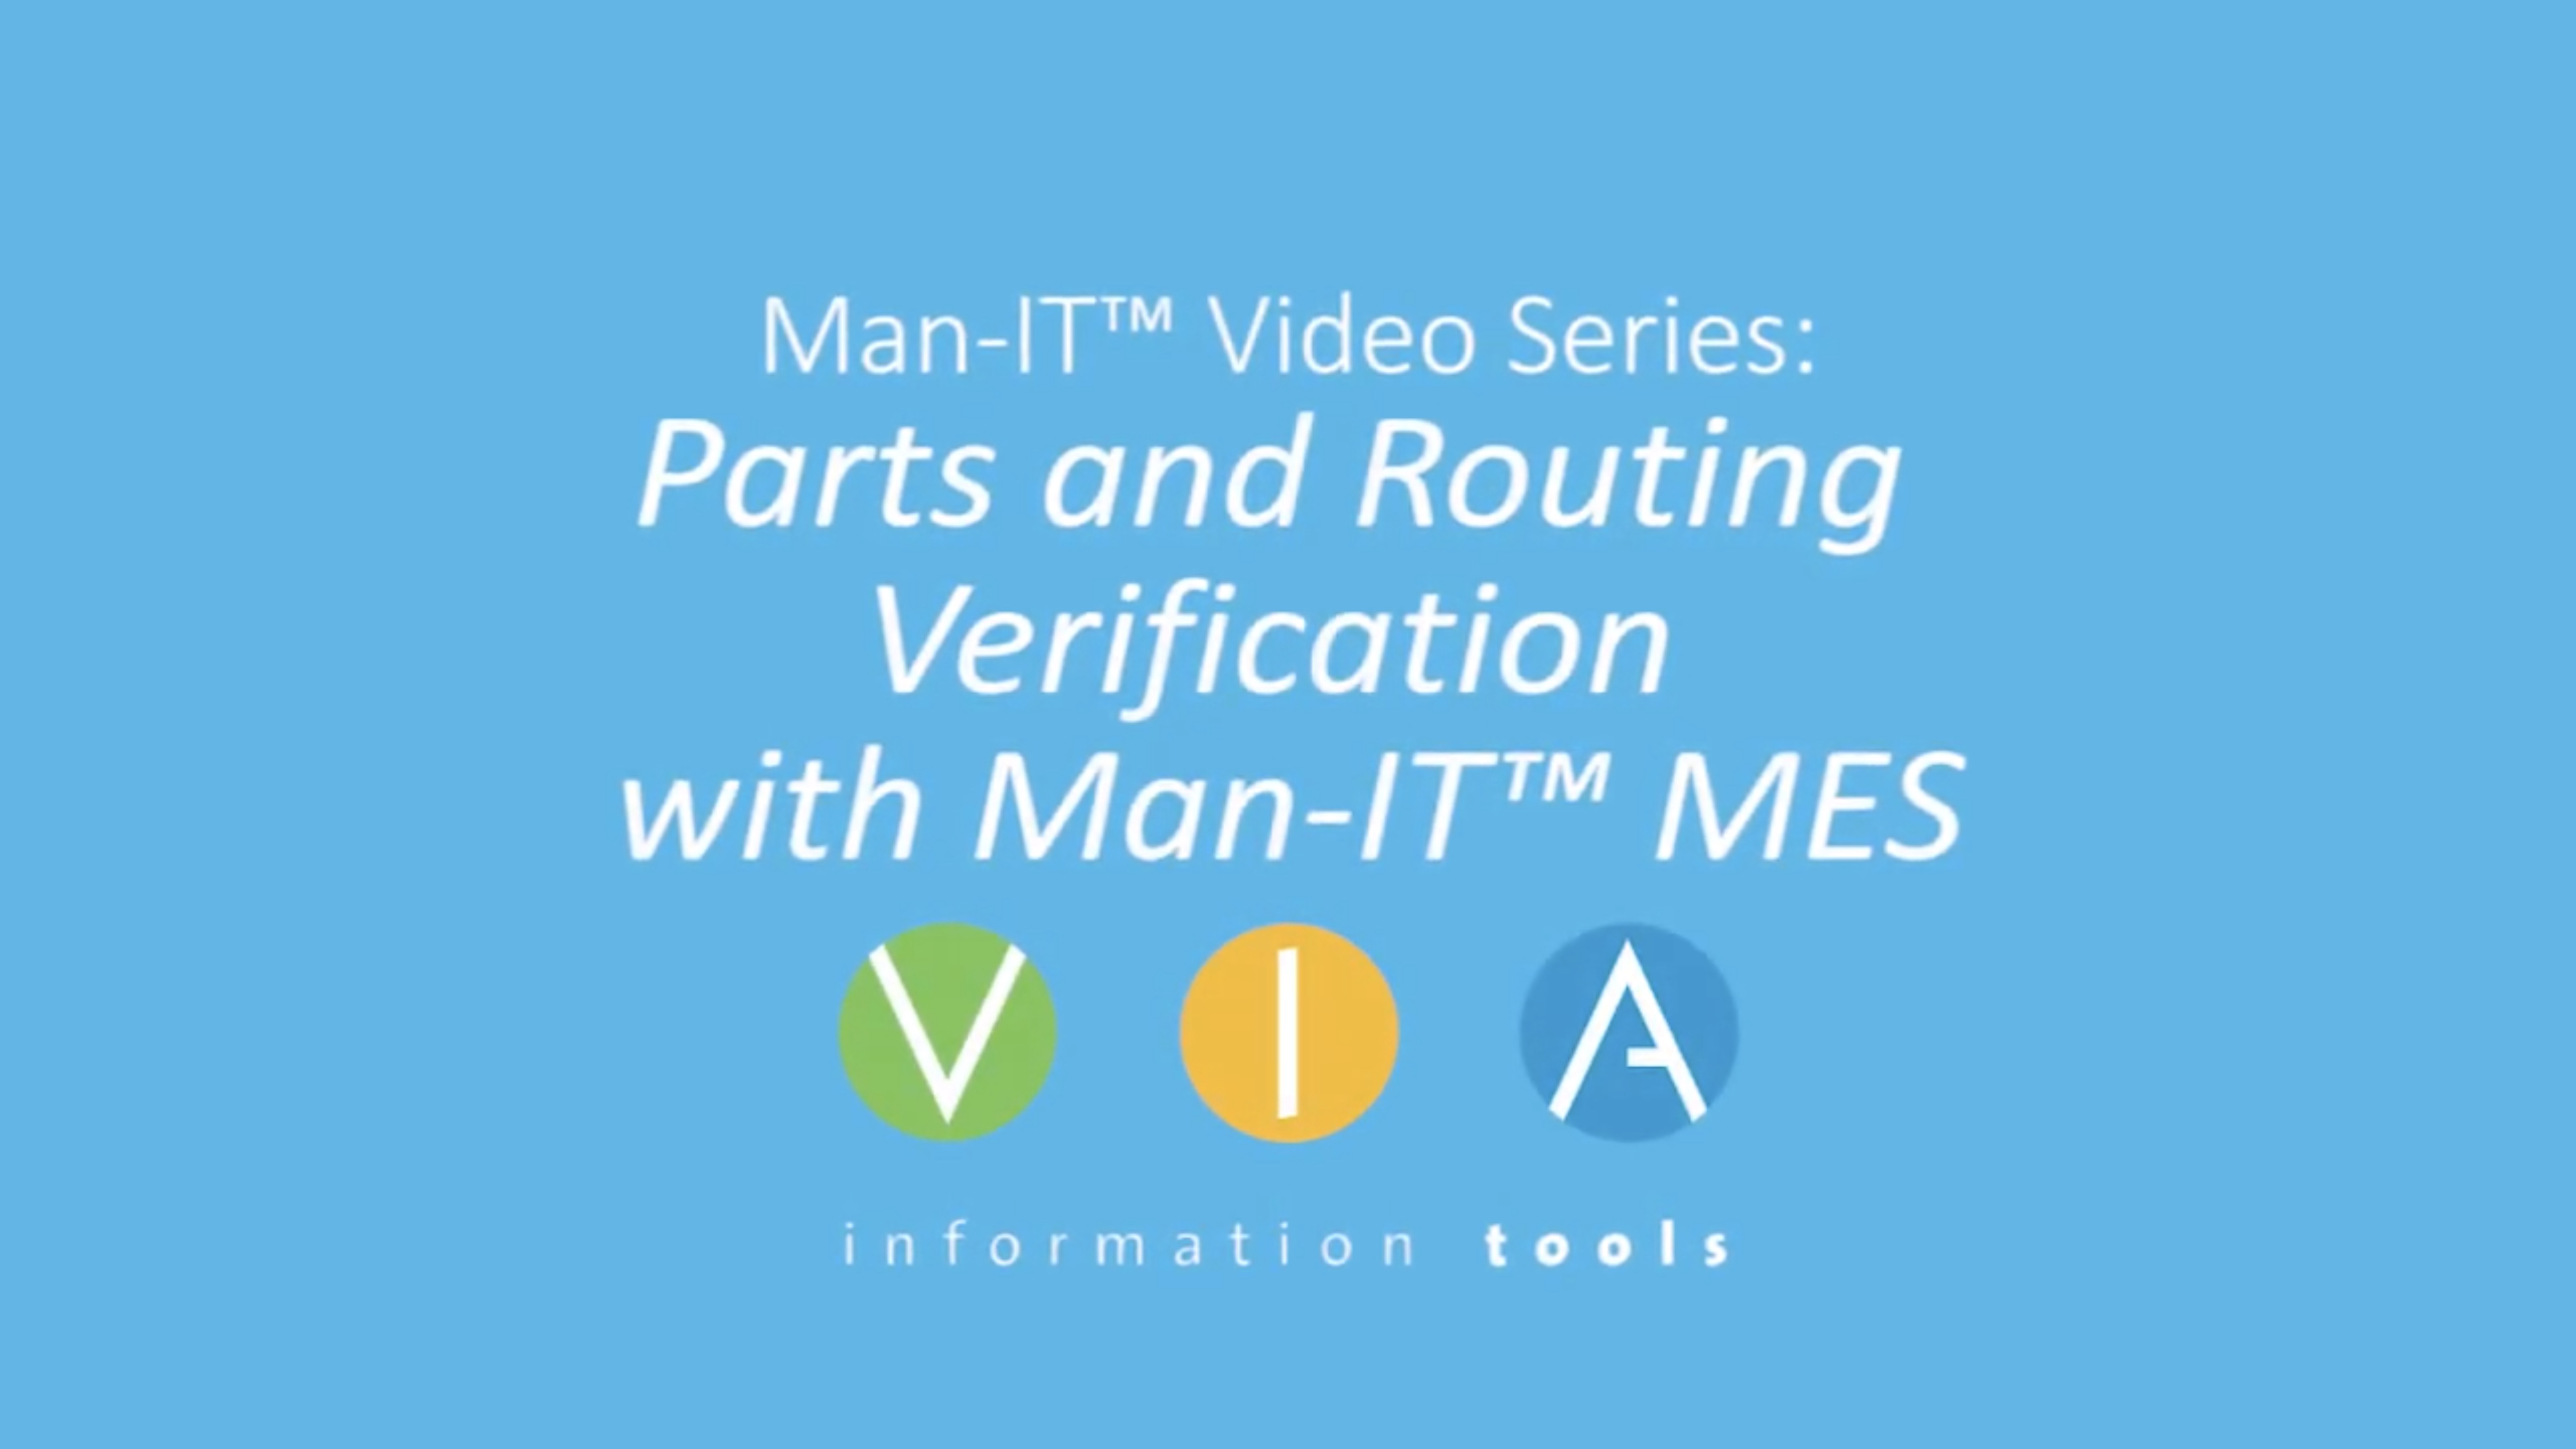 Video Series: Parts and Routing Verification with Man-IT™ MES